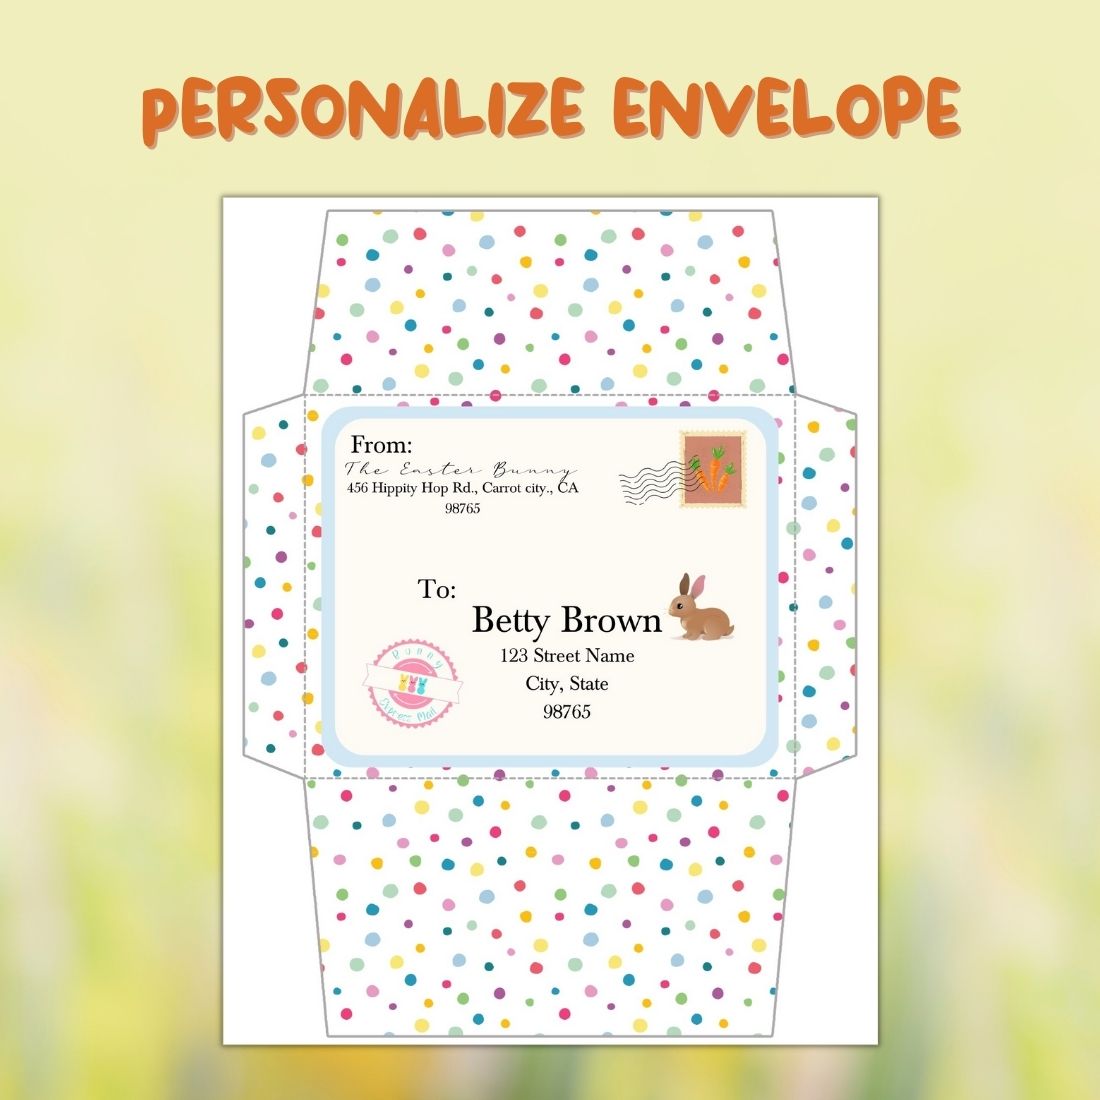 Personalized envelope with a bunny on it.